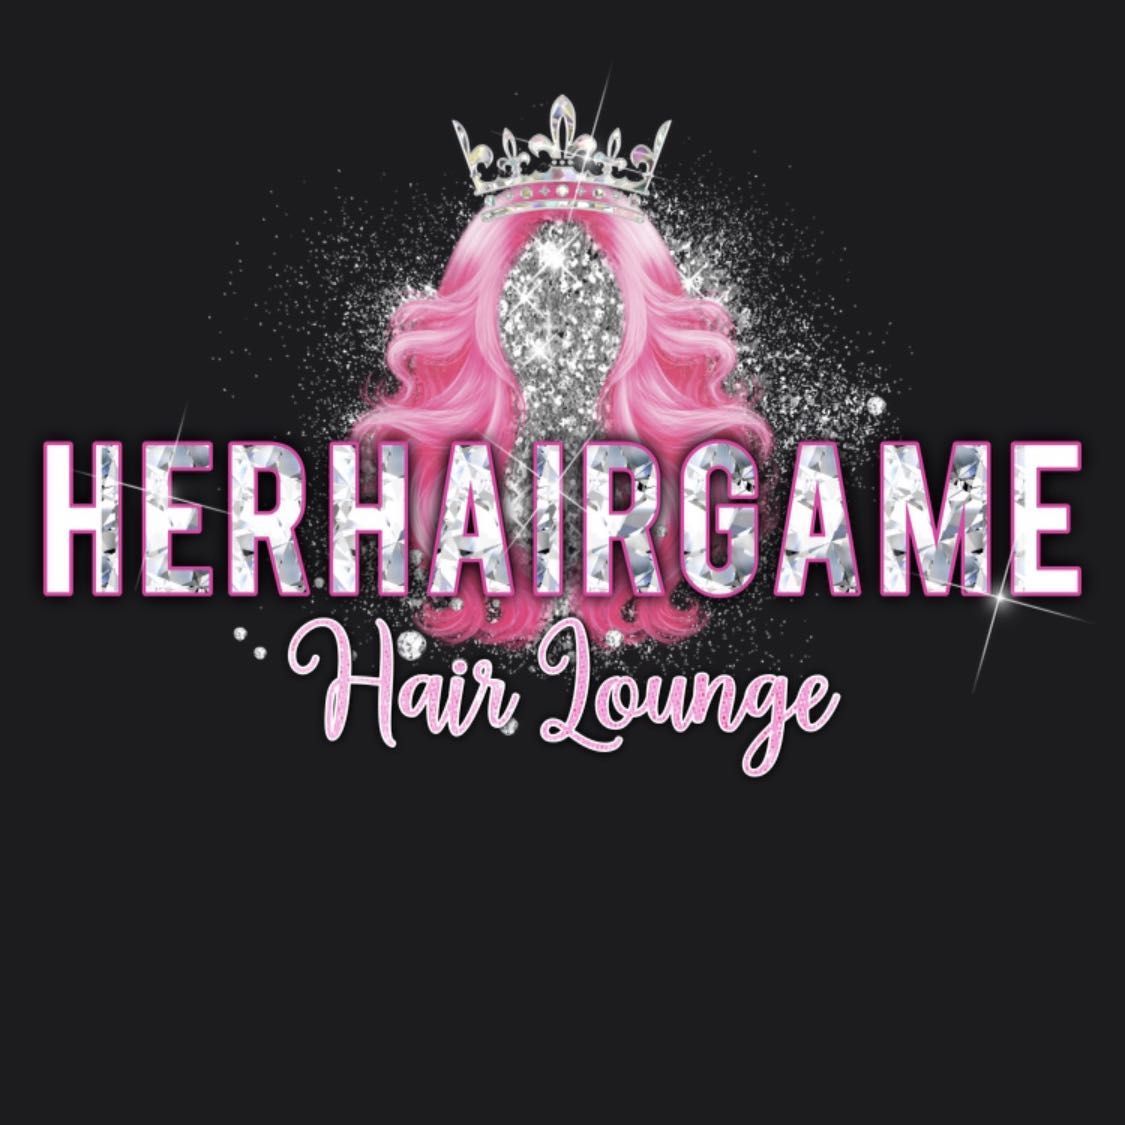 HERHAIRGAME, New location: 2126 Newpark Mall Road Suite #110 Newark, Moved From: 22126 mission blvd, Hayward, Newark, 94560